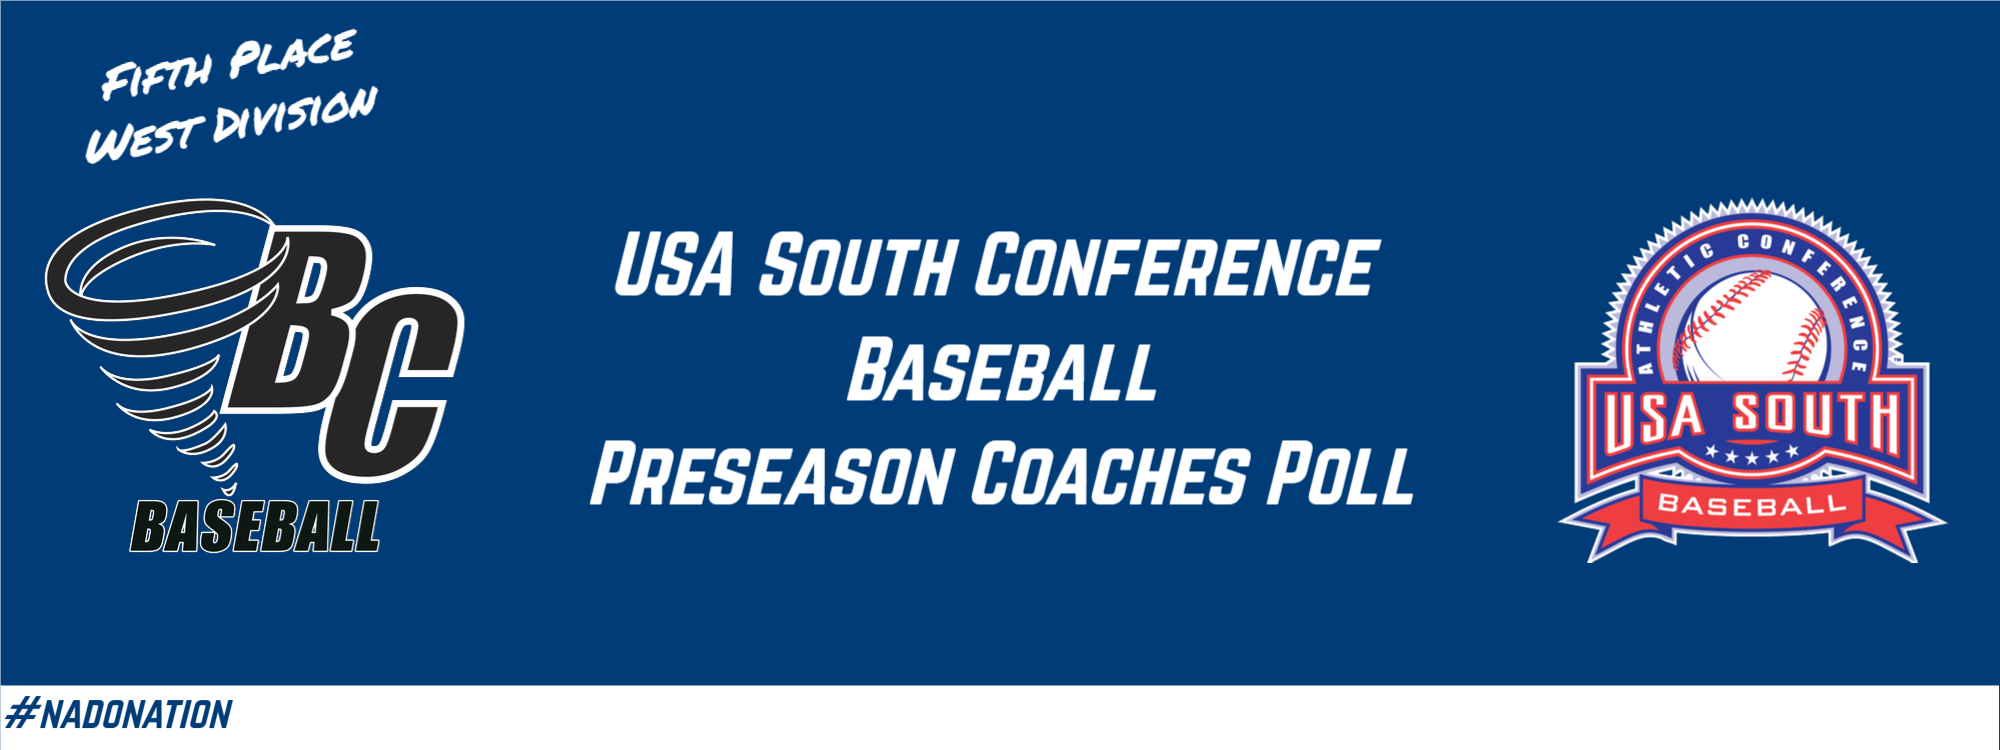 Baseball Picked Fifth in West Division